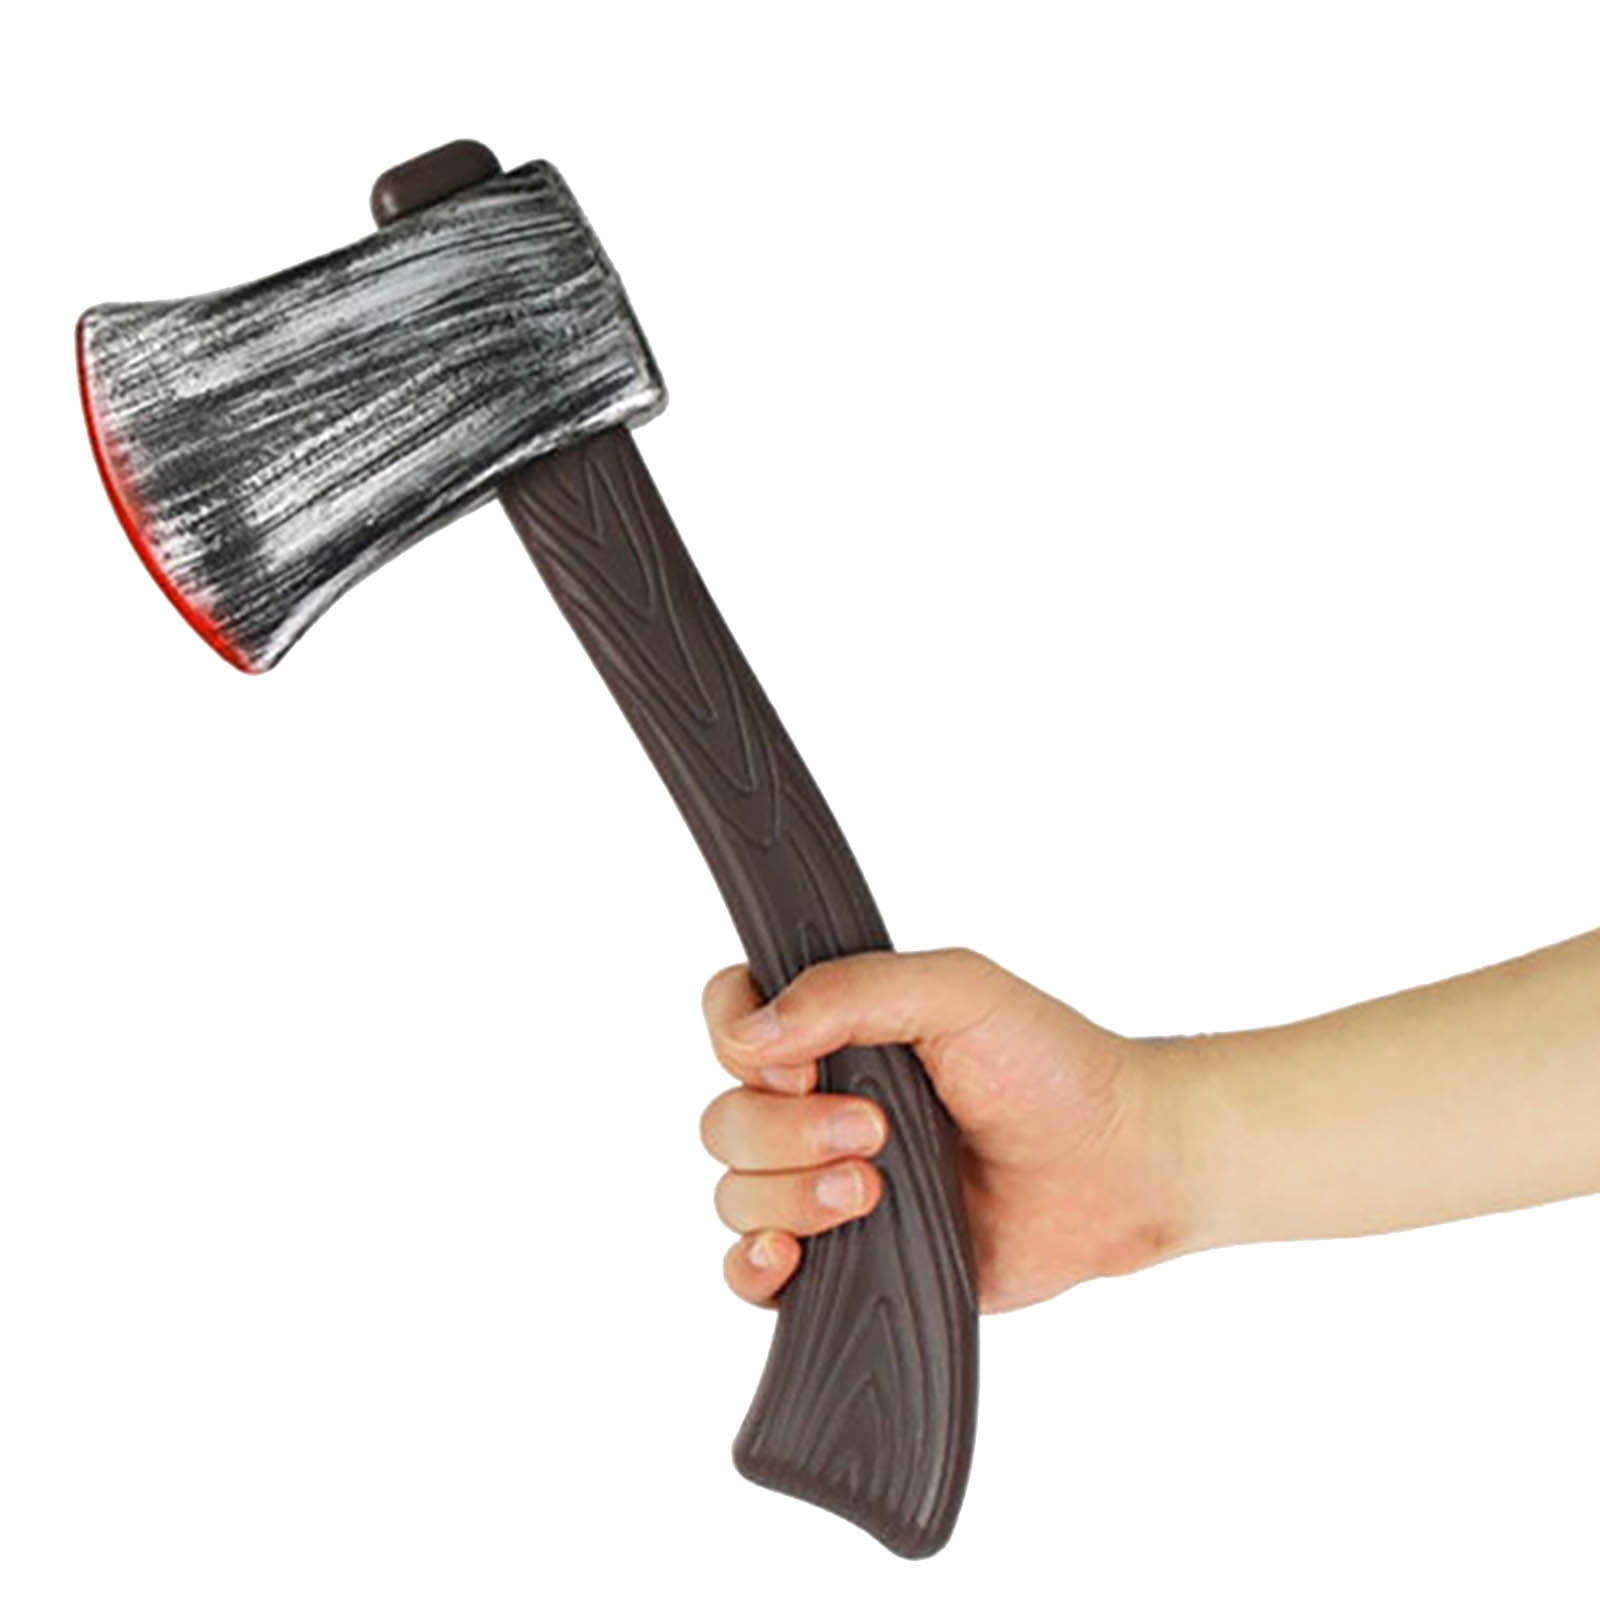 Jsaierl Halloween Plastic Weapon Simulation Axe Sickle Cosplay Stage Show Chainsaw Horror Props